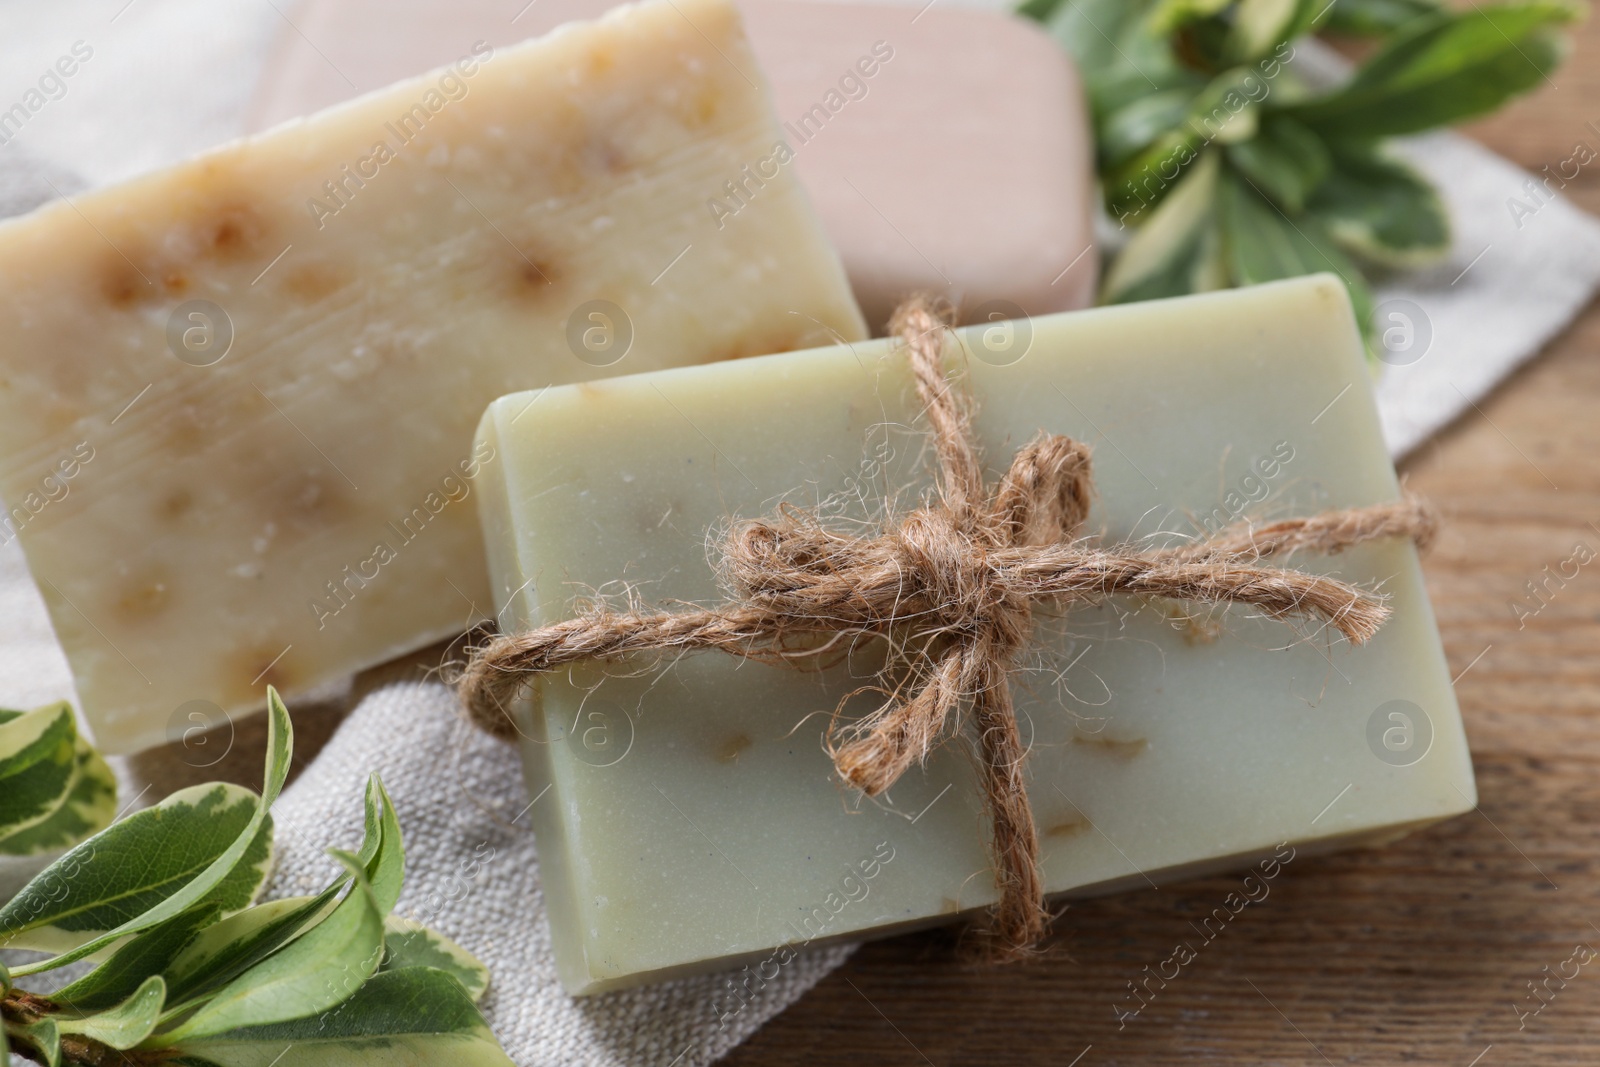 Photo of Soap bars and green plants on wooden table, closeup